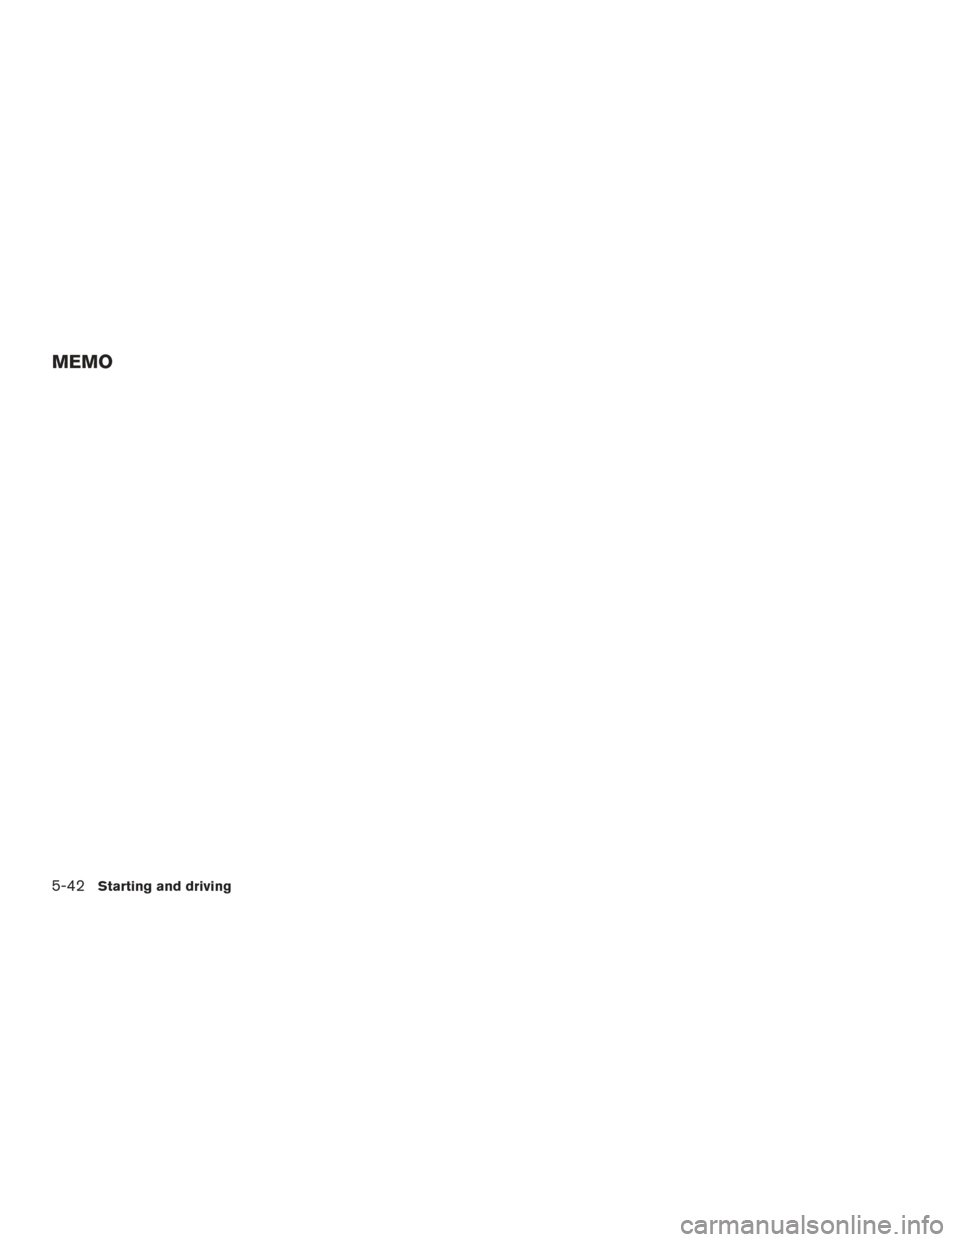 NISSAN TITAN 2015 1.G Owners Manual MEMO
5-42Starting and driving 